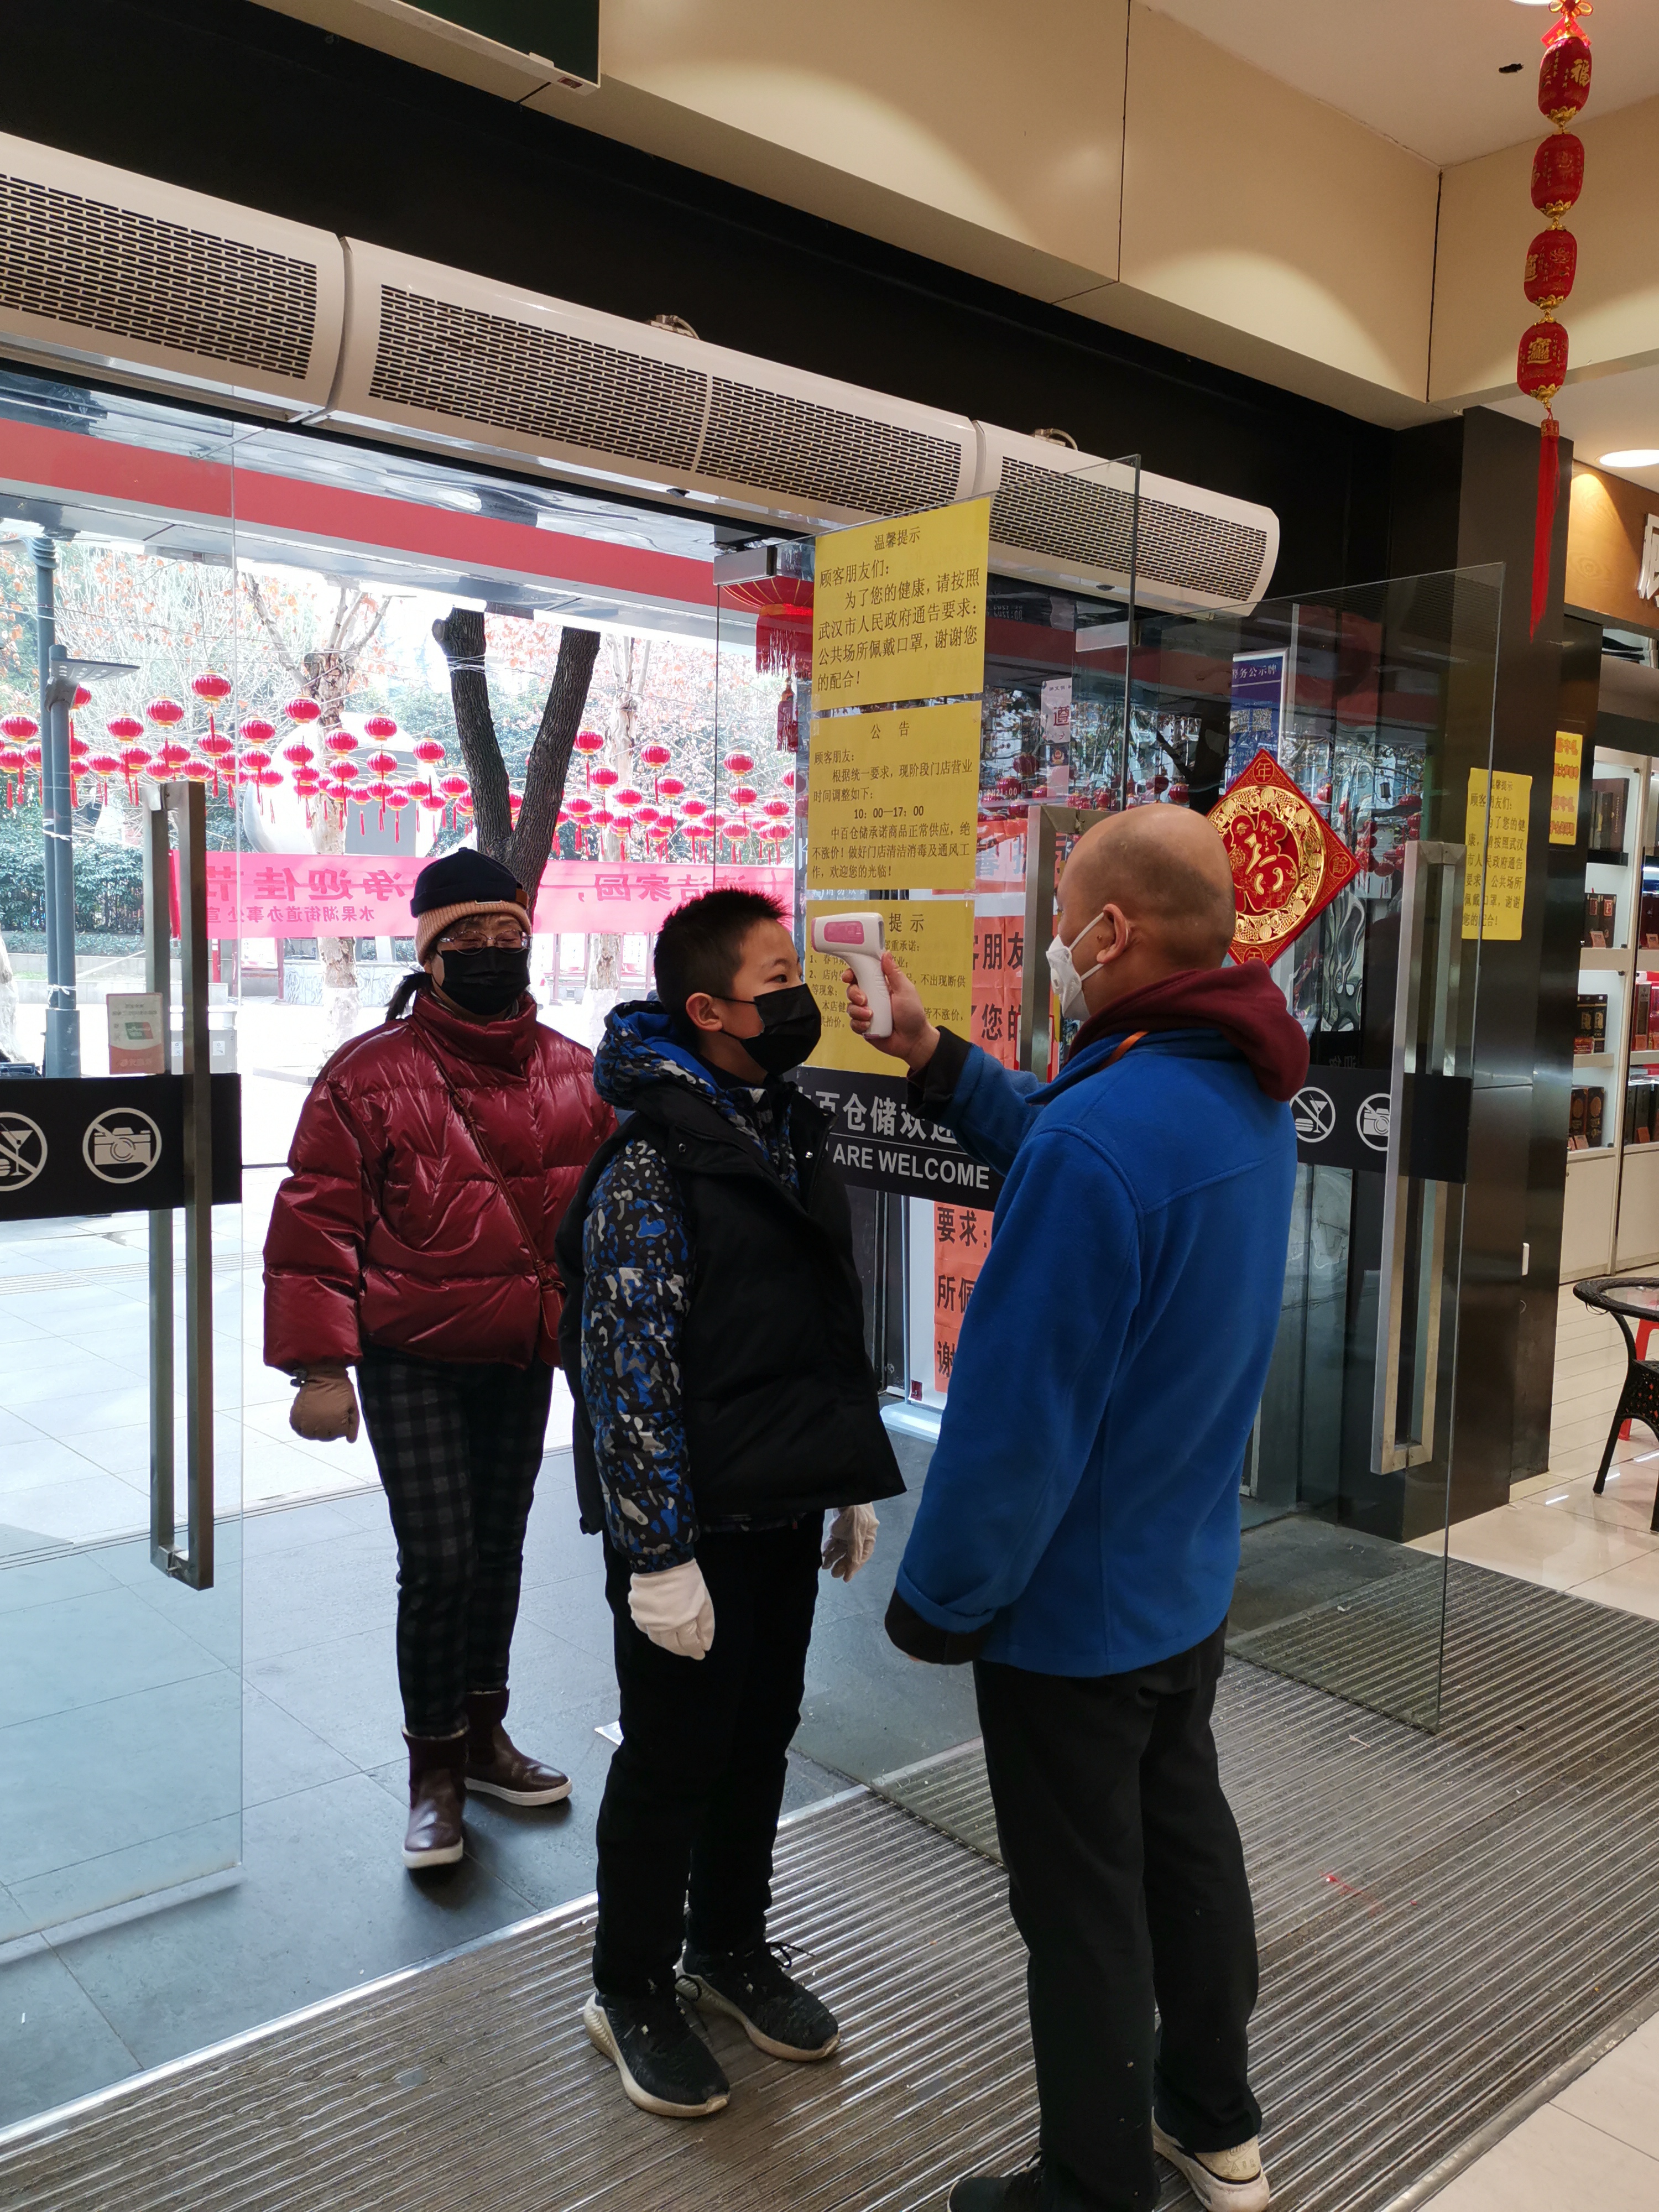 Customers who were measuring body temperature before entering the supermarket in Wuhan during 2019-nCoV coronavirus outbreak